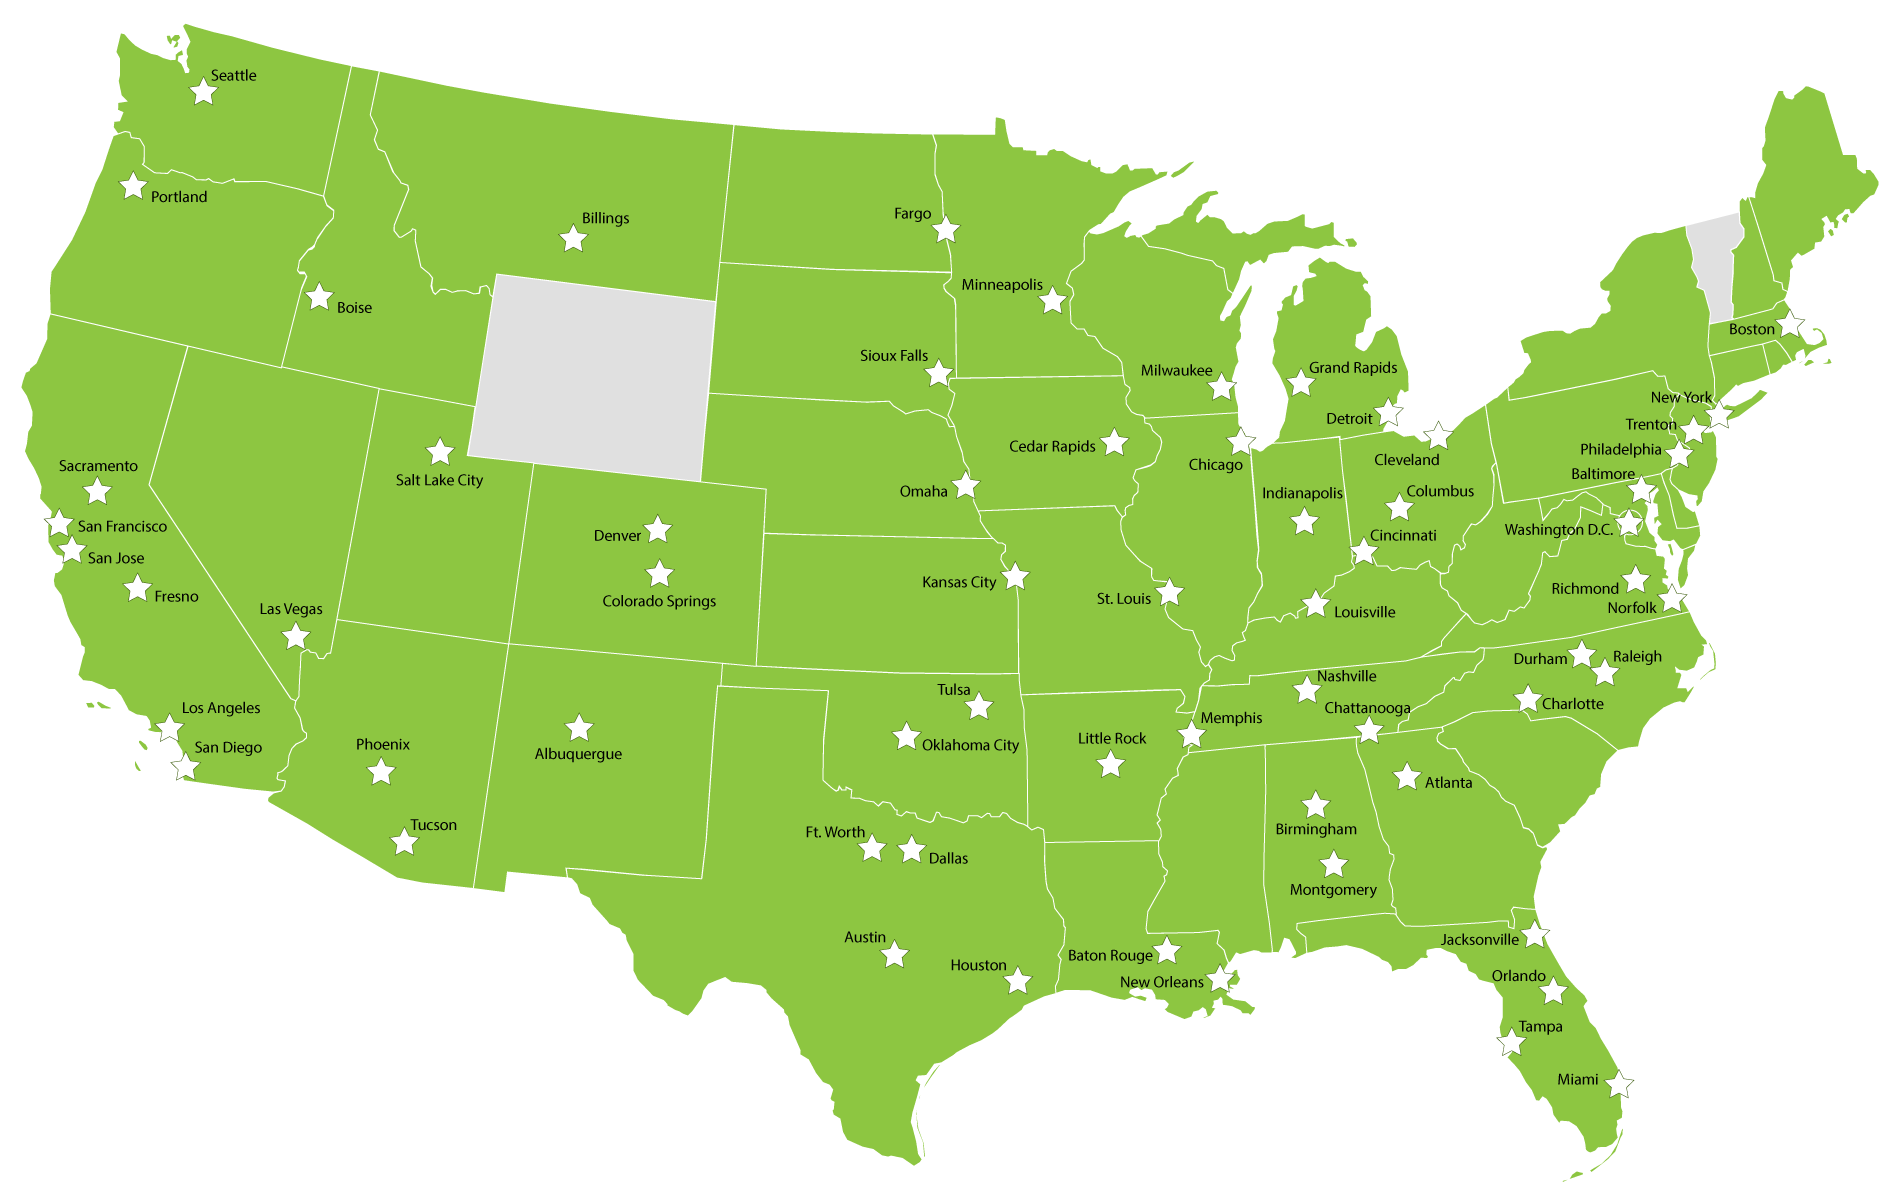 Nationwide Junk Removal and Assembly Service Area Map